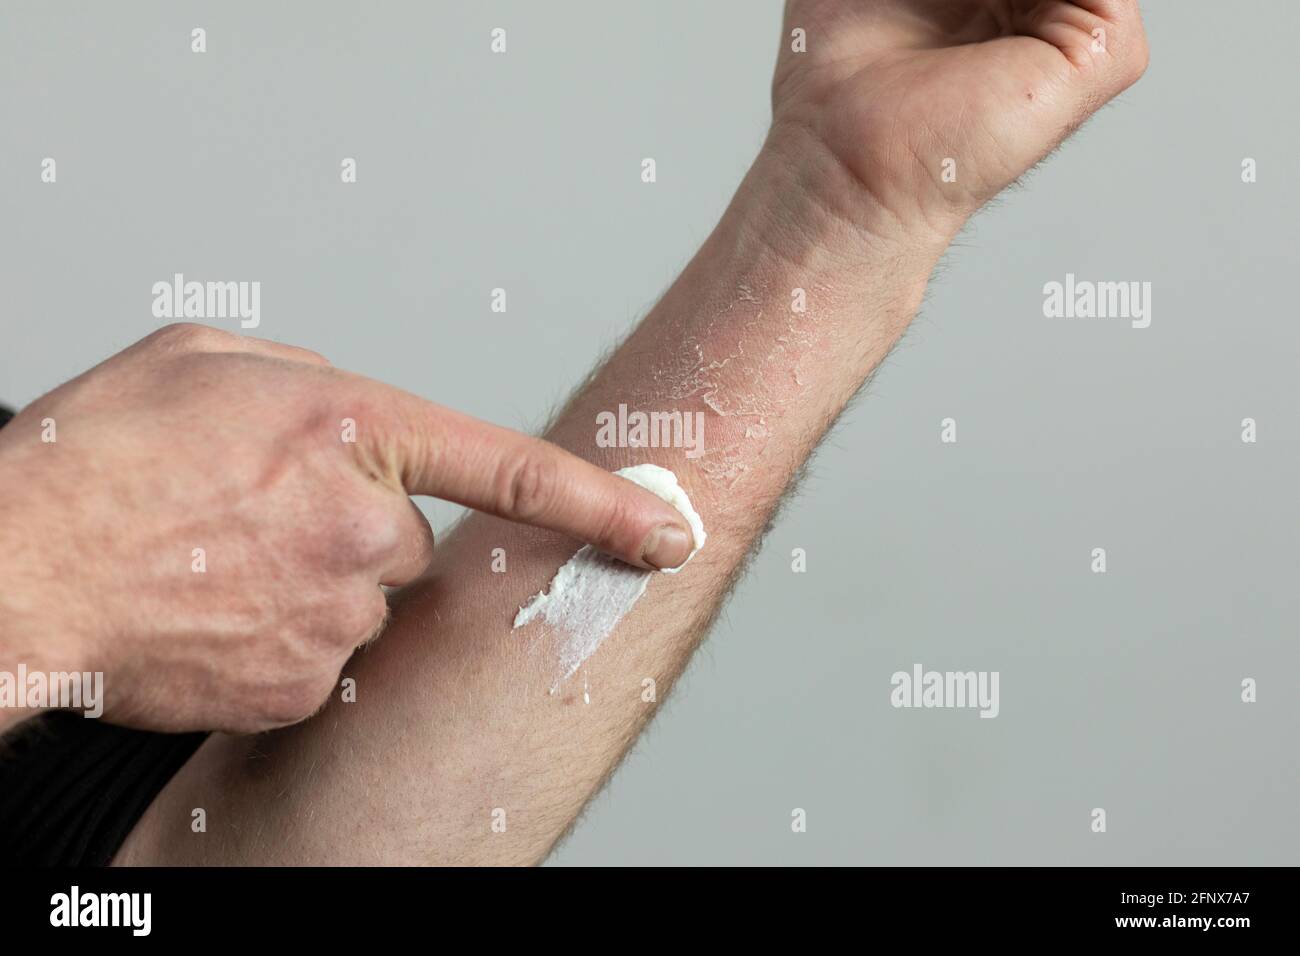 Sunscreen being applied on a sunburnt peeling skin on a damaged mans arm. A painful dry injured cracked part of the body healing from too much uv ligh Stock Photo